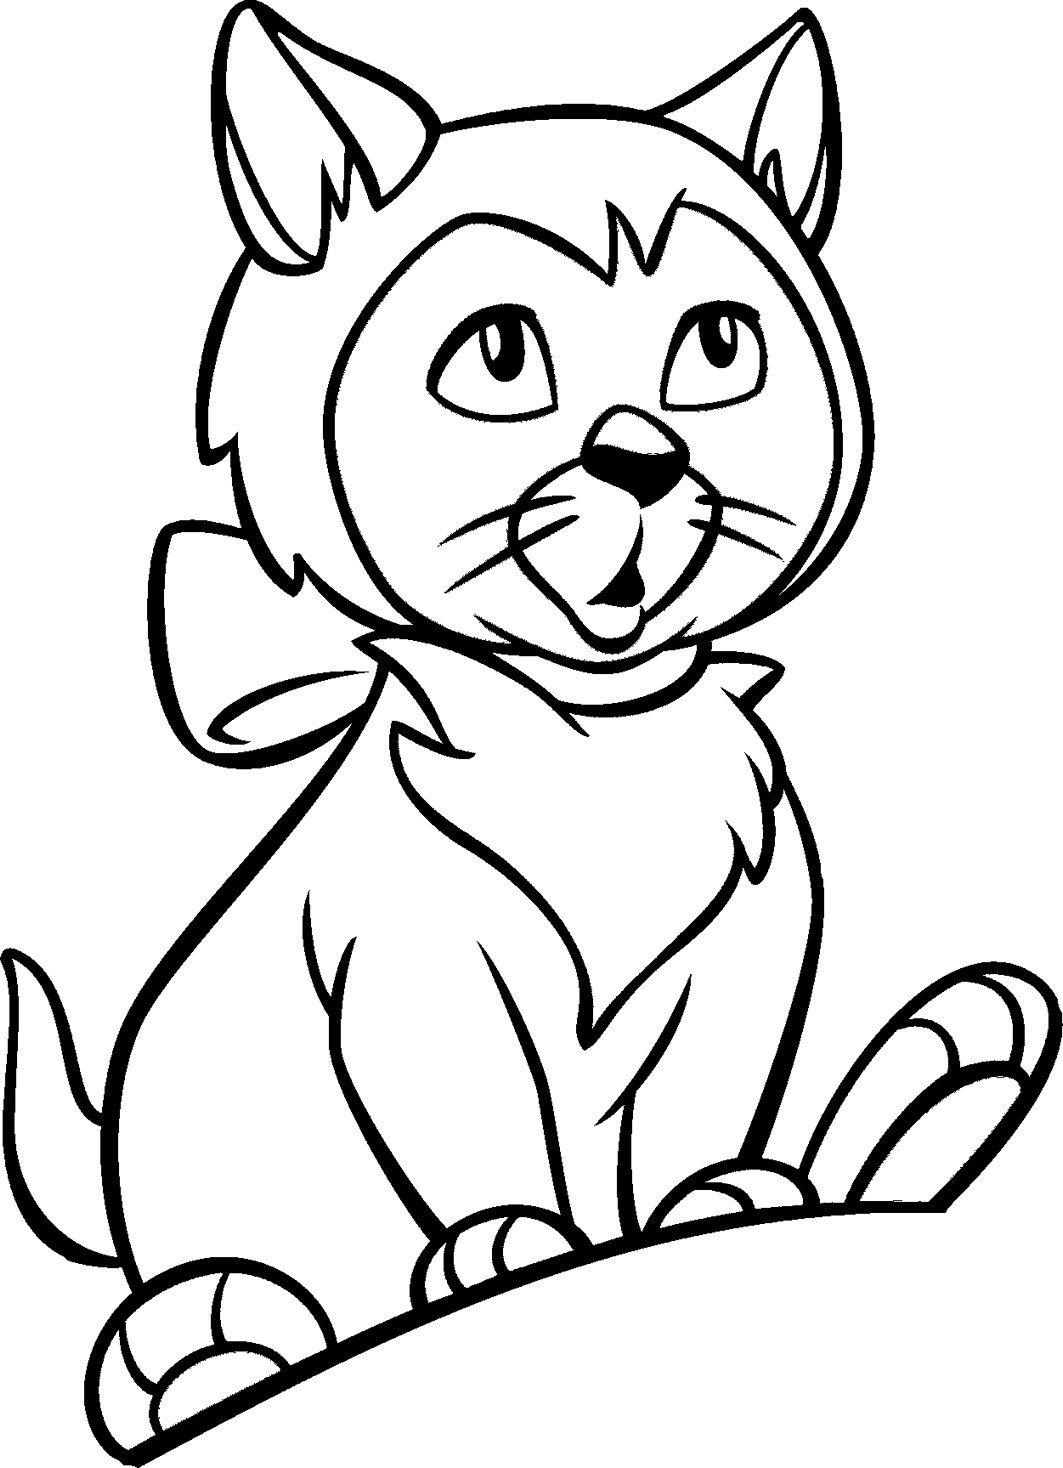 Kids Coloring Page
 Coloring Pages for Kids Cat Coloring Pages for Kids